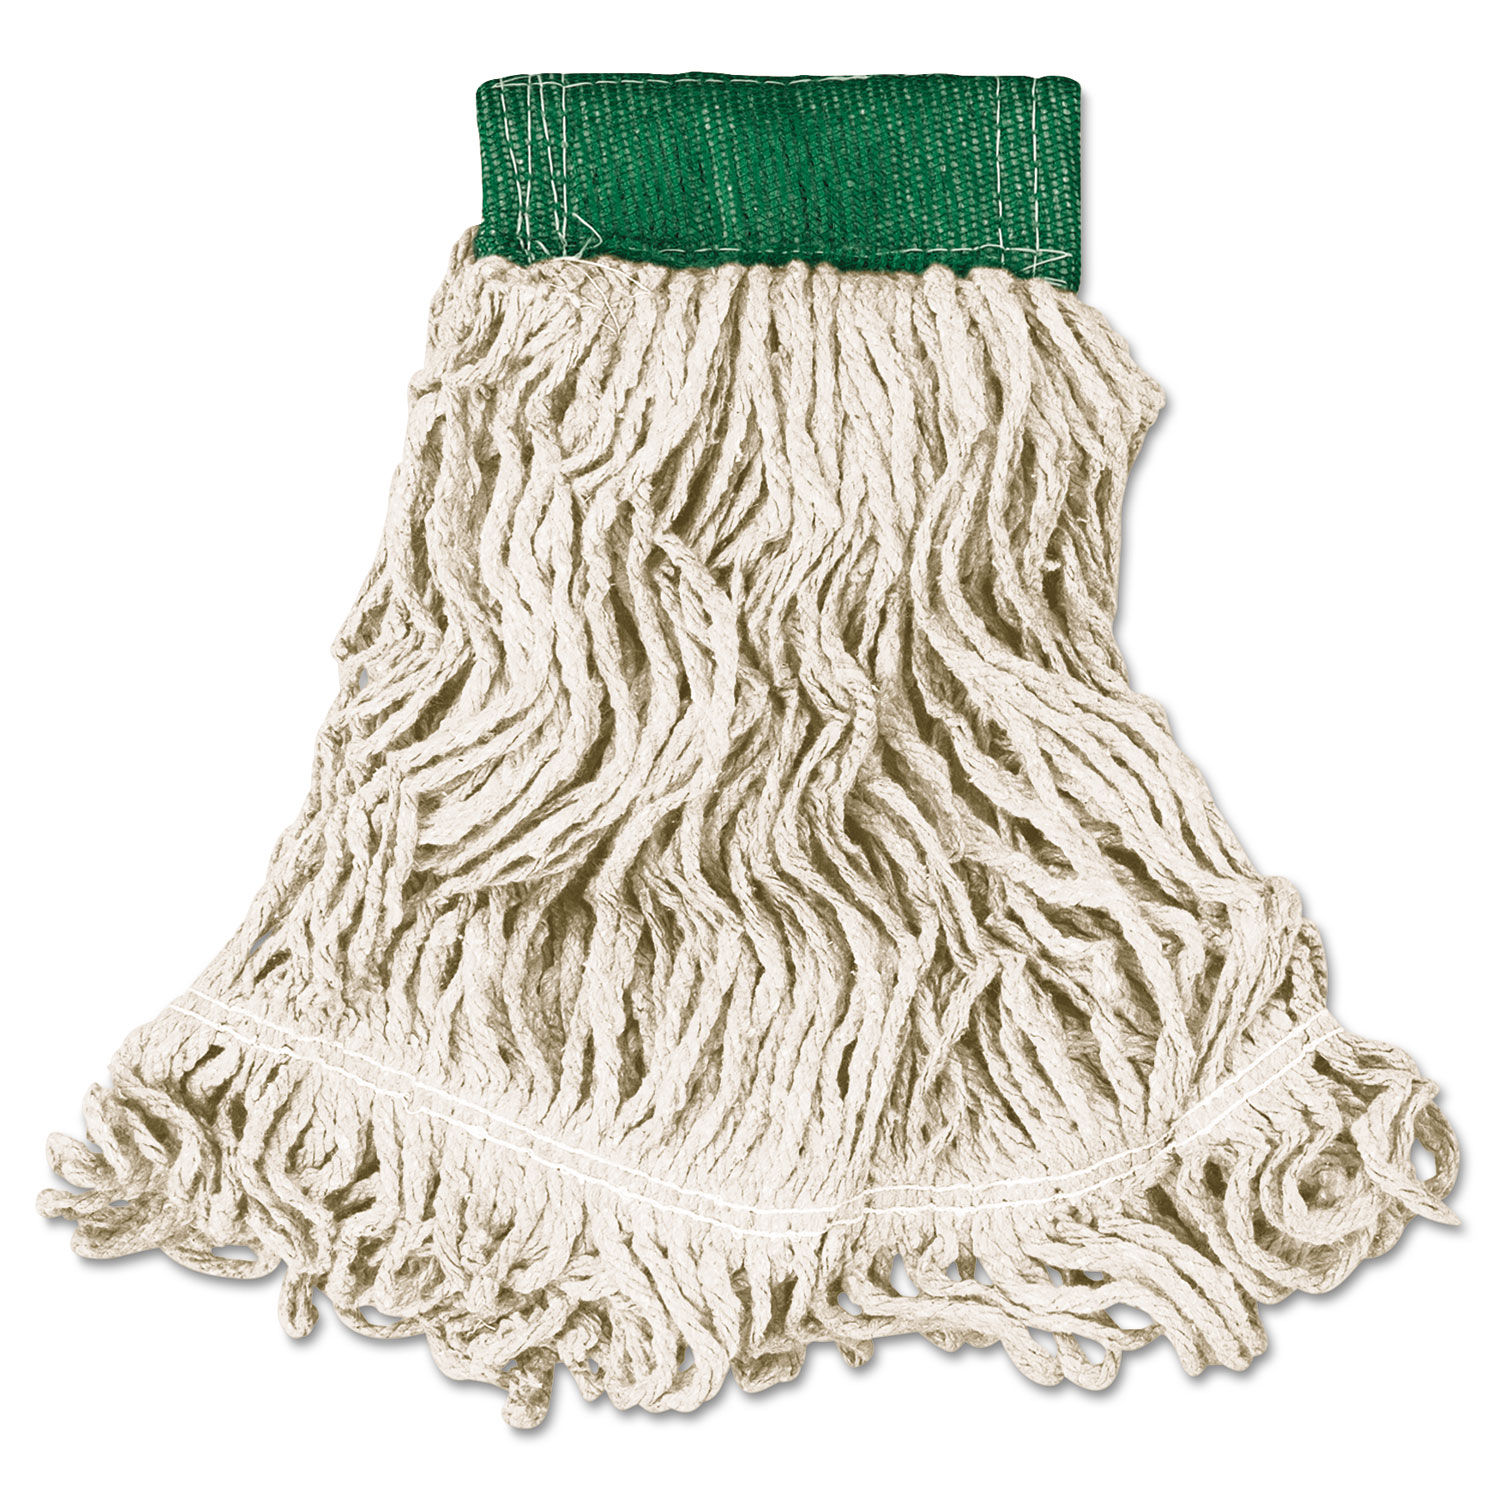 Super Stitch Looped-End Wet Mop Head Cotton/Synthetic, Medium, Green/White